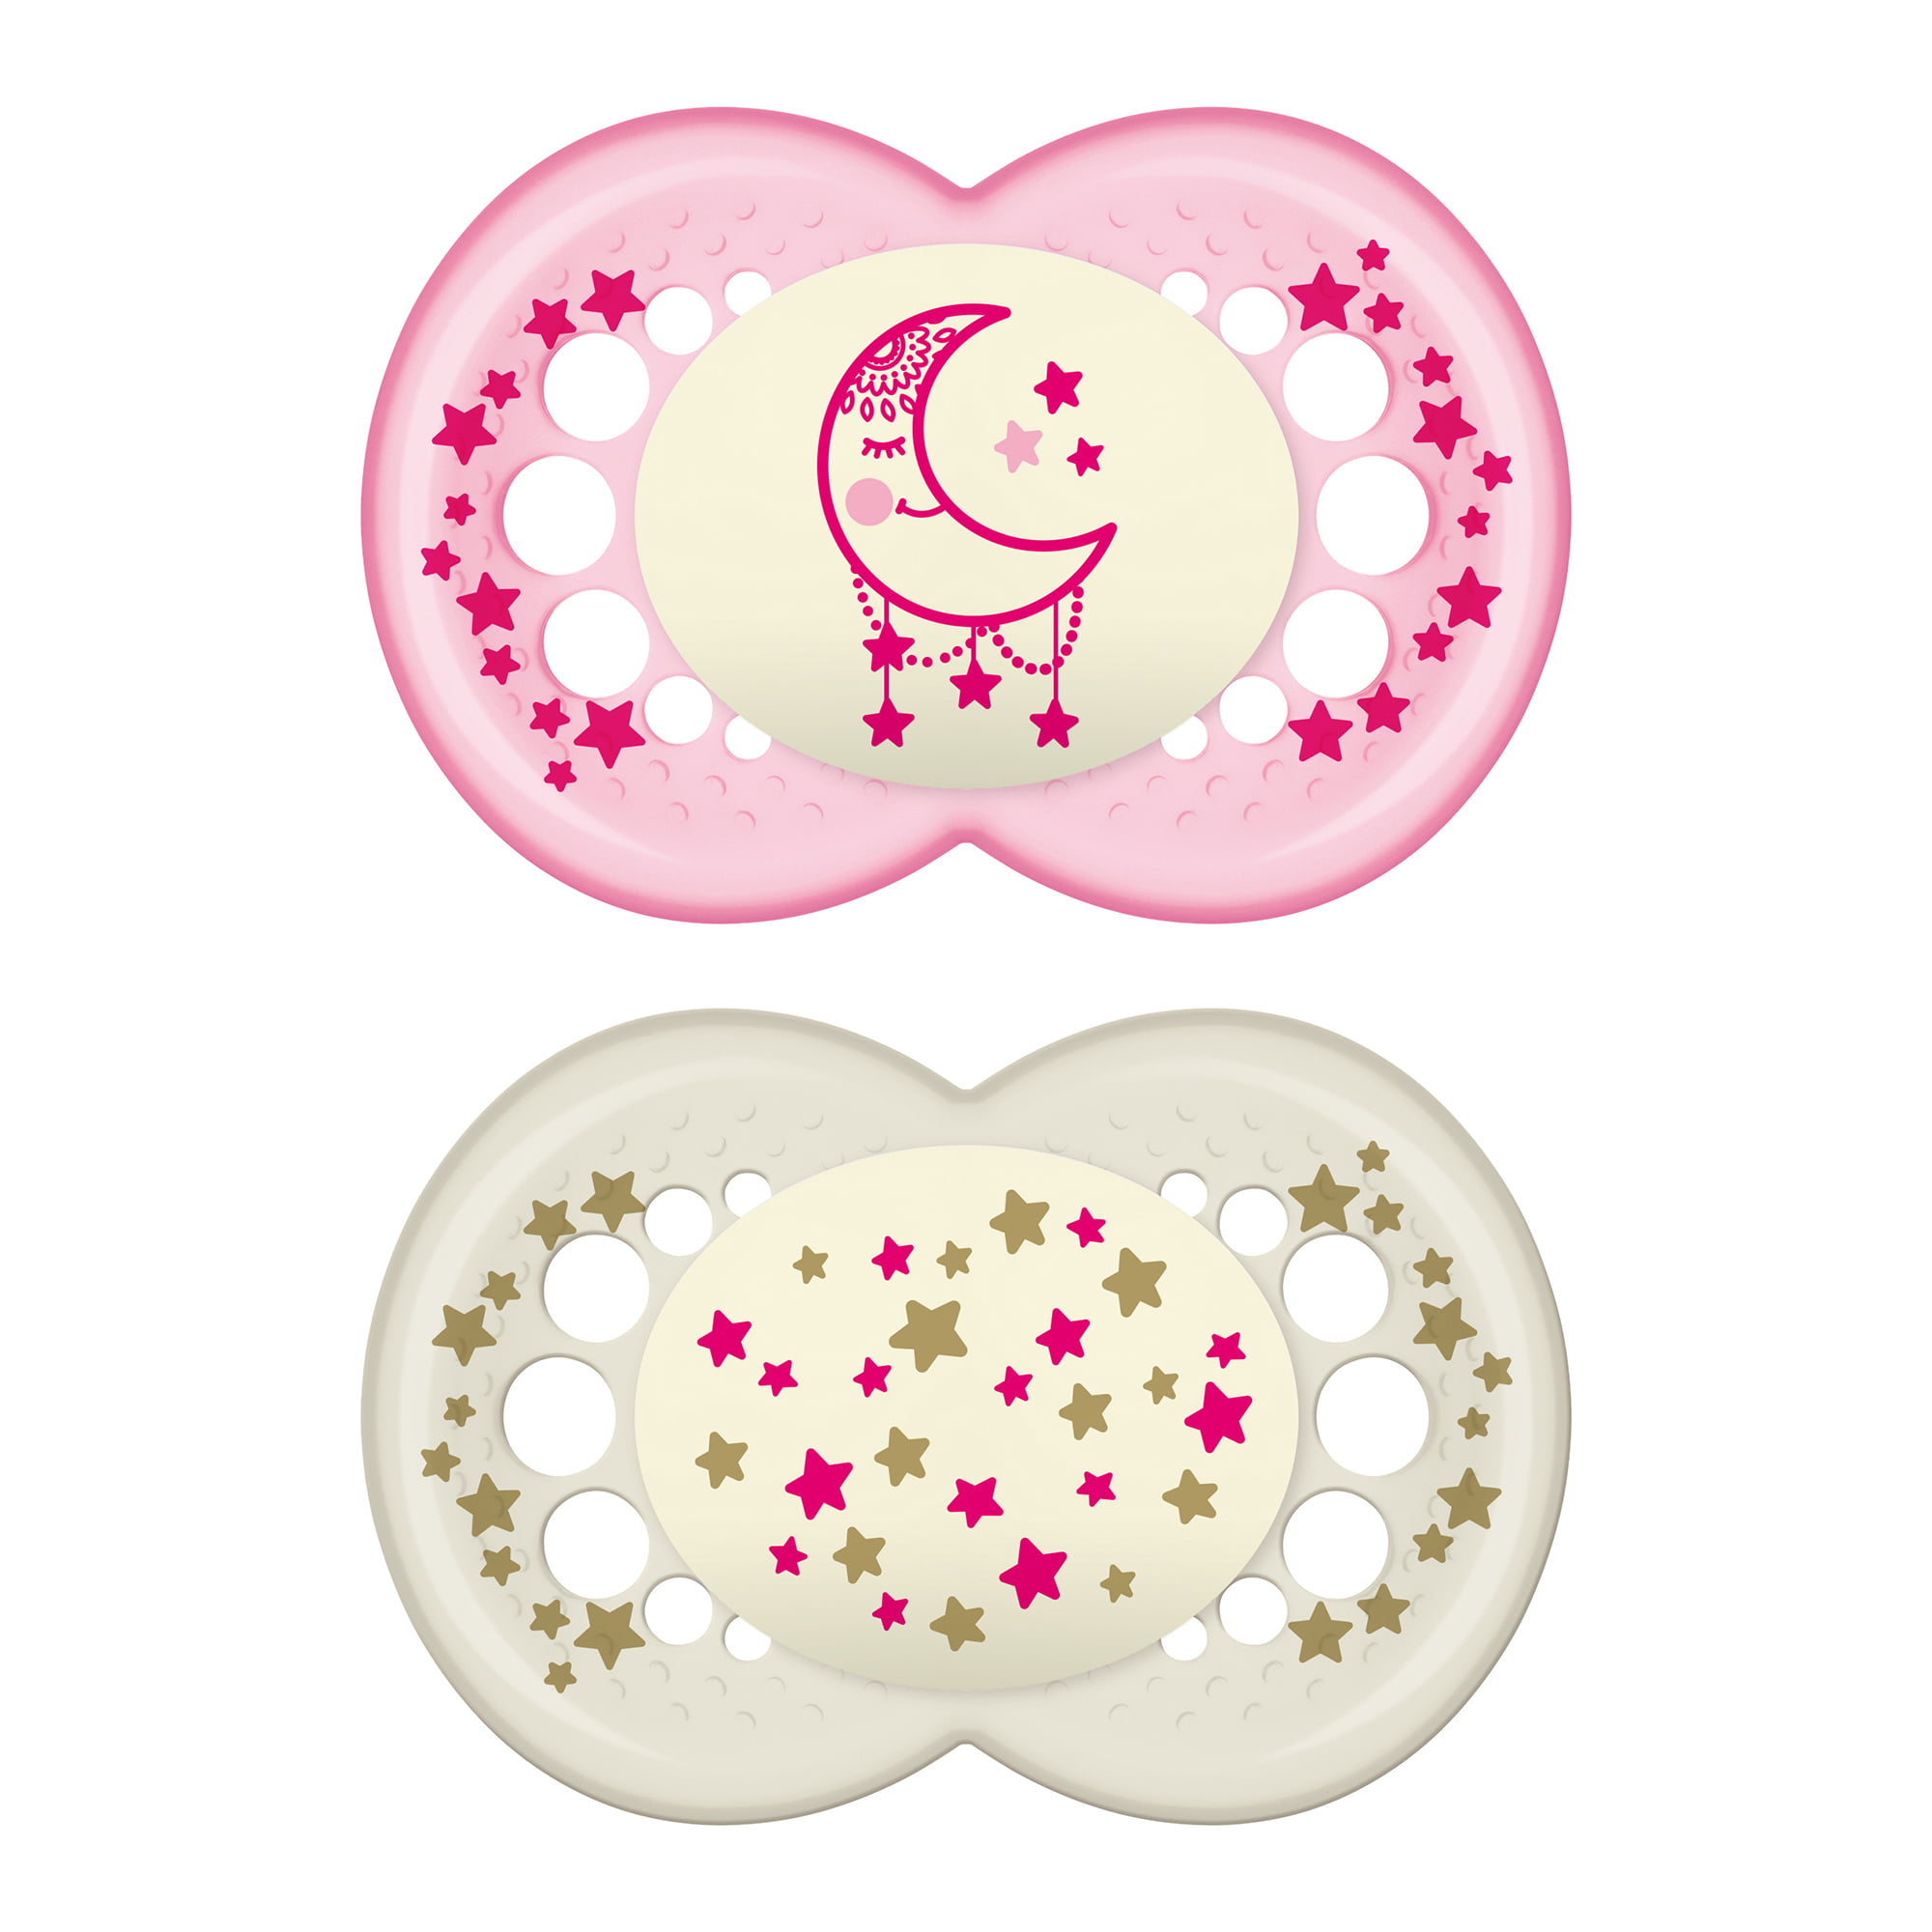 Mam Baby Soother Dummy Pacifier Teat Nipple 6m Girl Style 2 Pack Boy 12m 